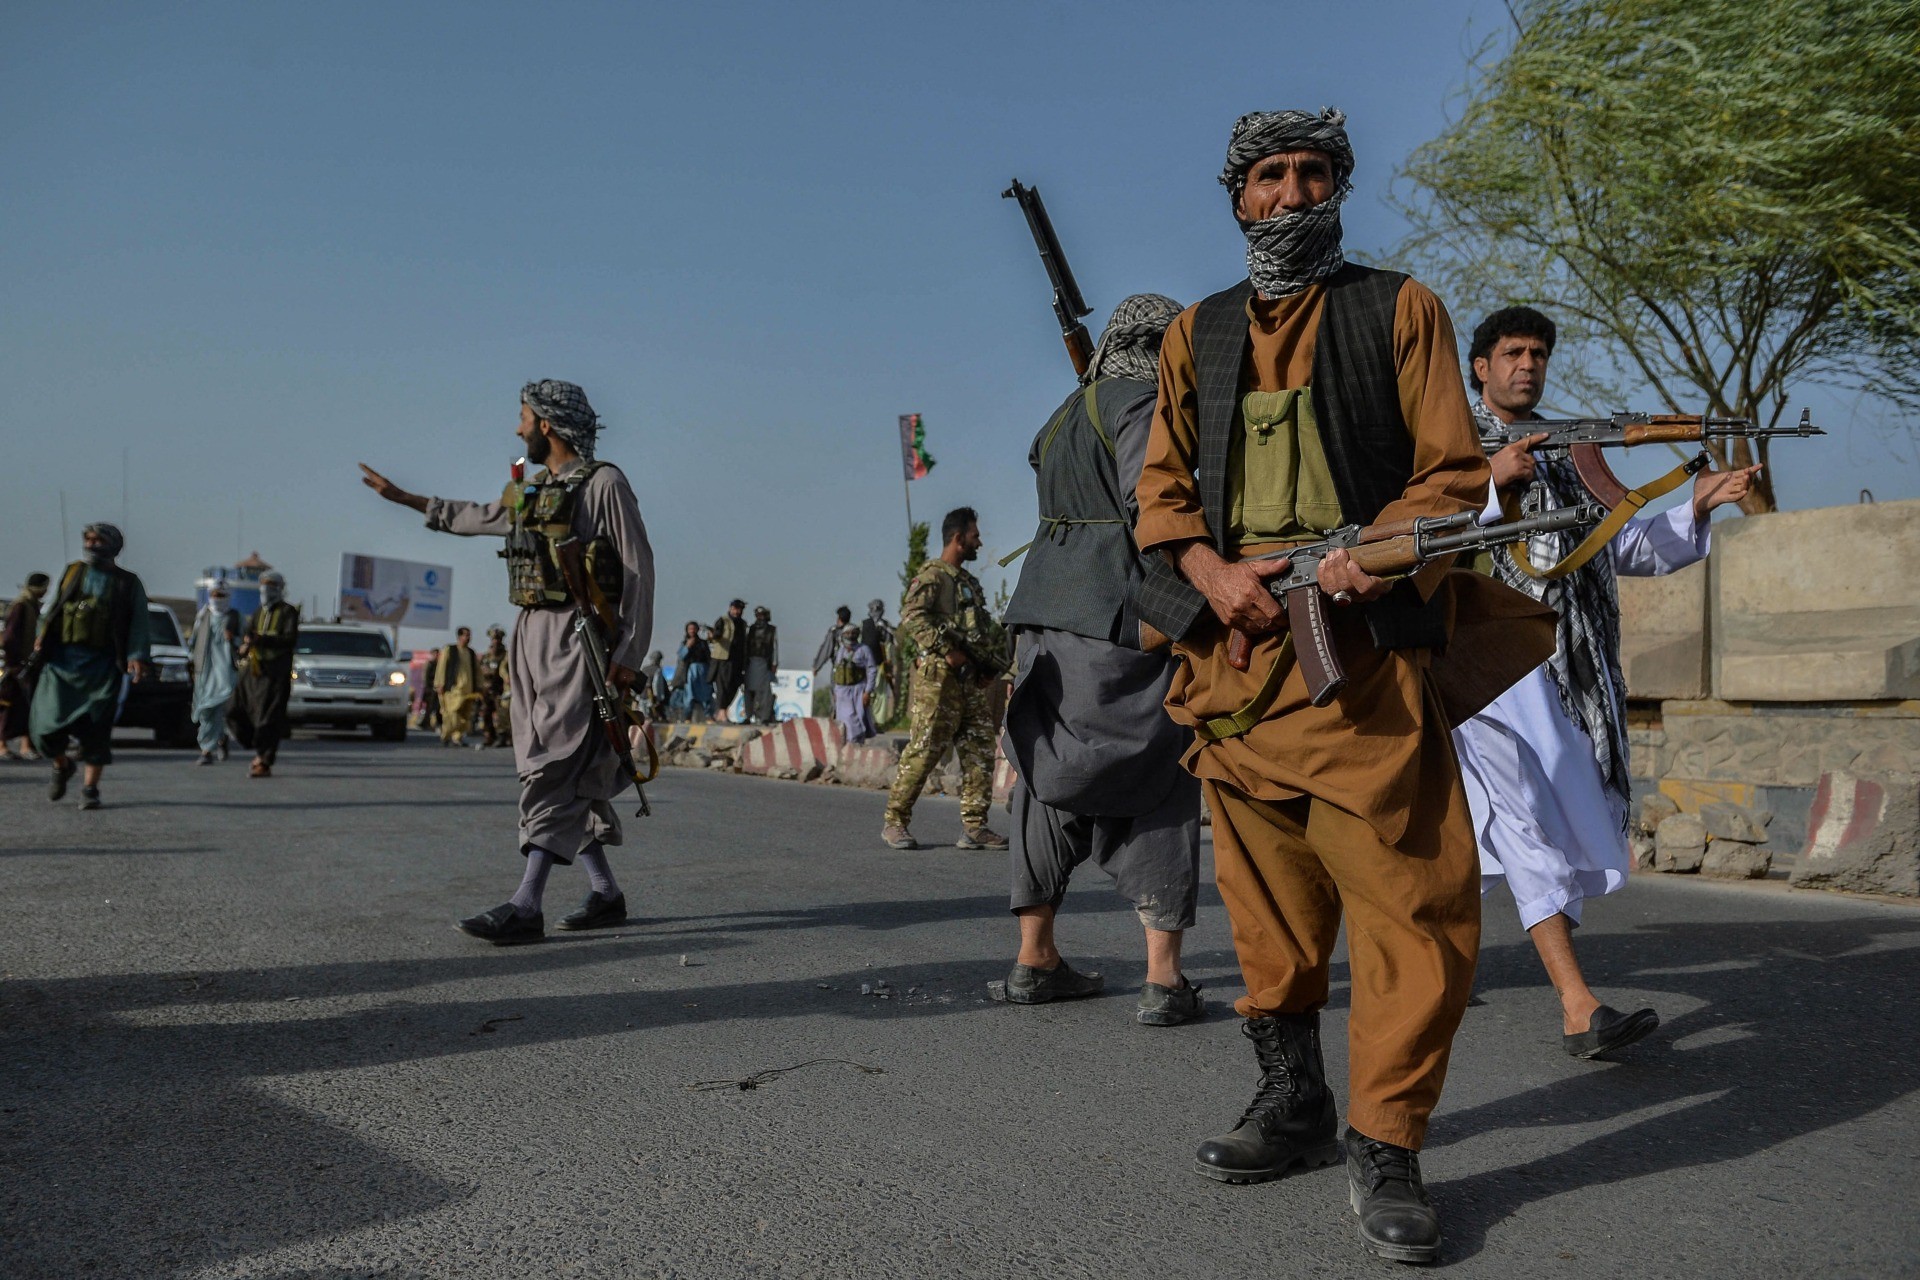 Afghan security personnel and Afghan militia fighting against Taliban, stand guard in Enjil district of Herat province on July 30, 2021. (Photo by Hoshang Hashimi / AFP) (Photo by HOSHANG HASHIMI/AFP via Getty Images)